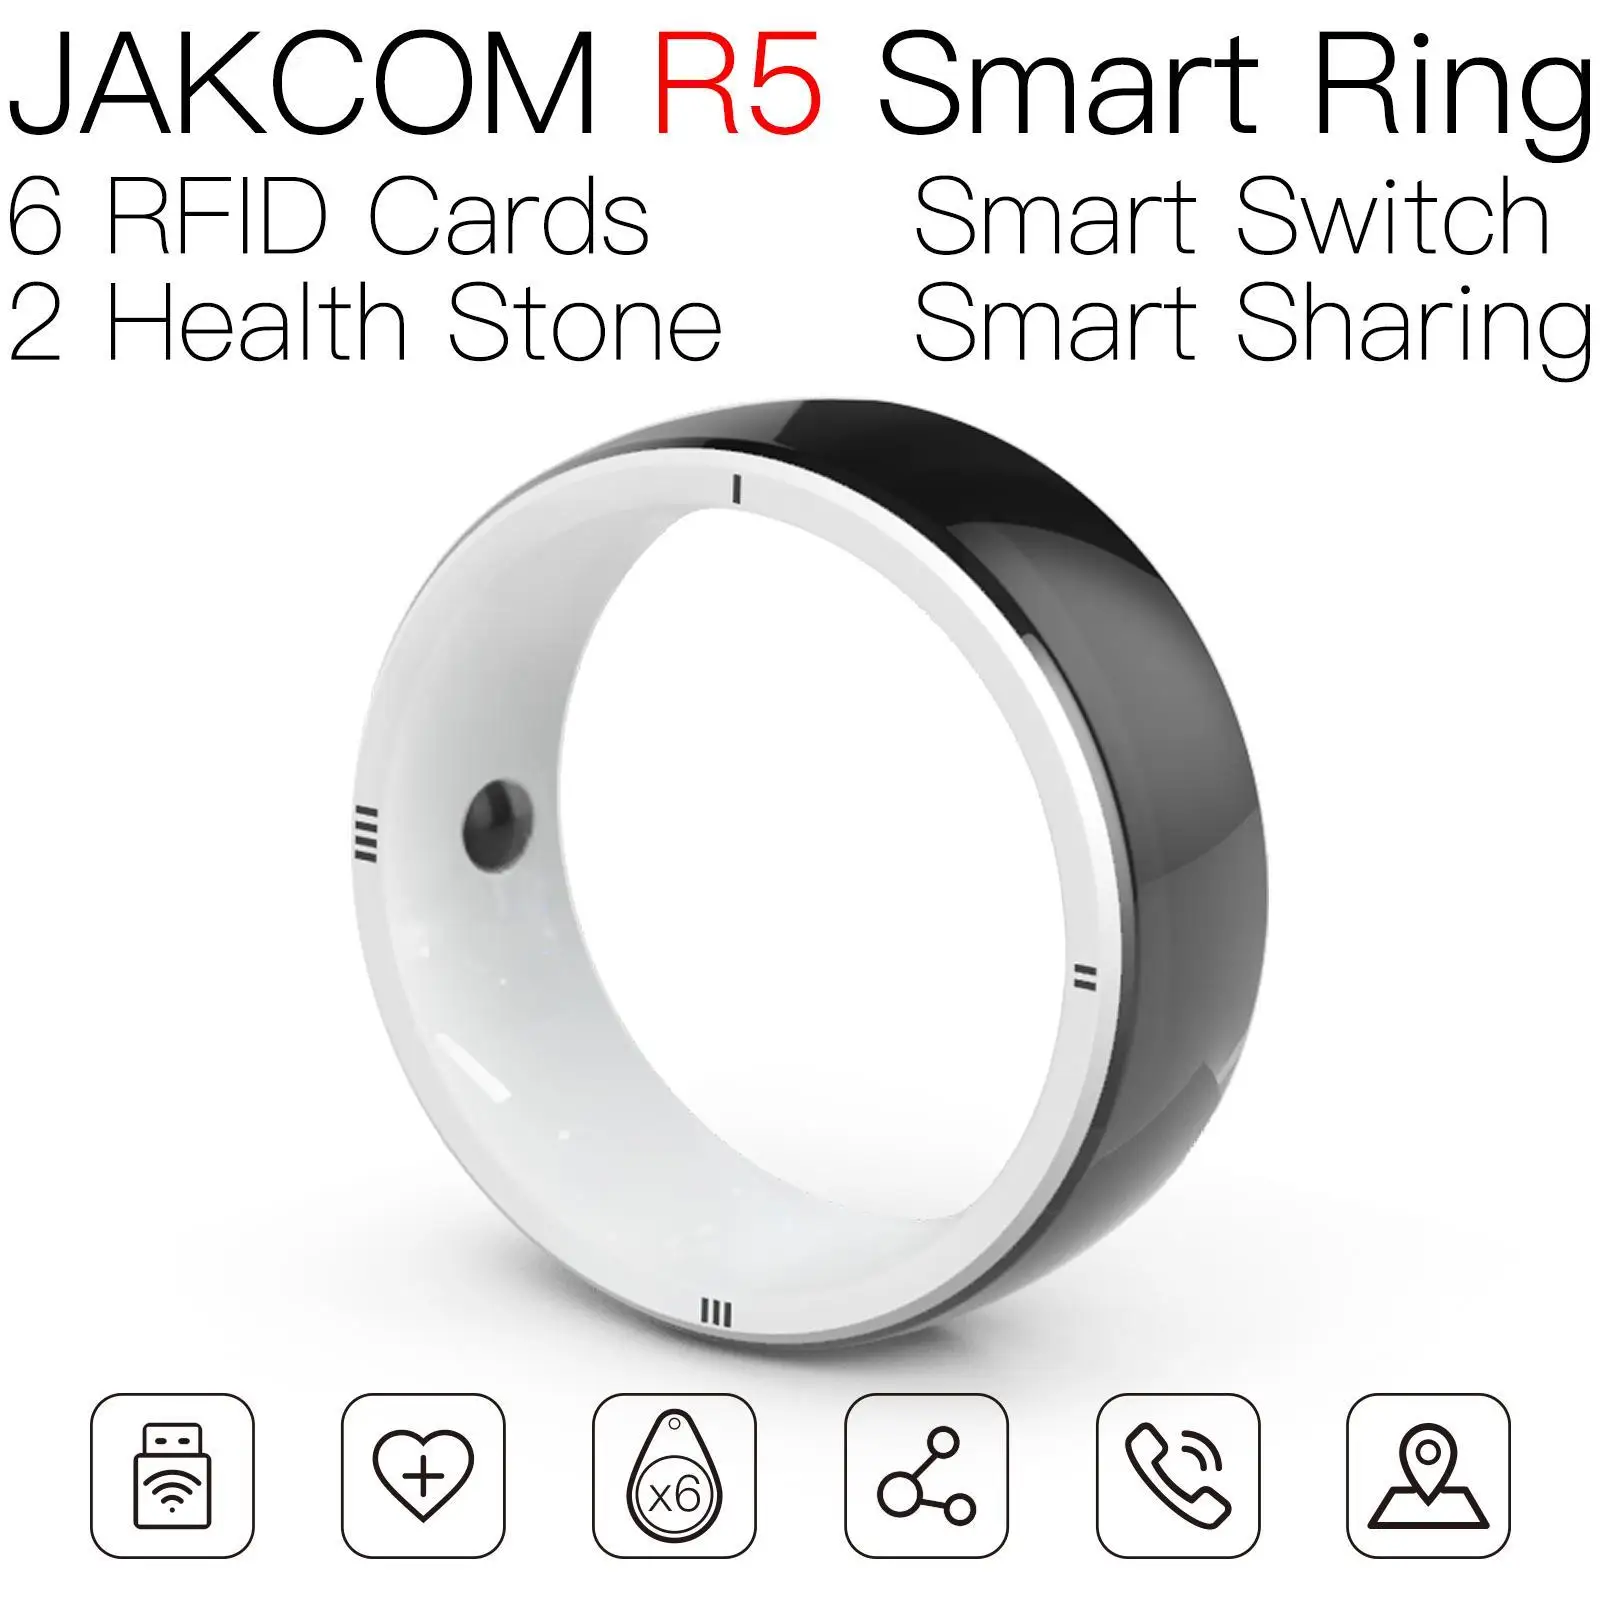 

JAKCOM R5 Smart Ring Nice than em 4305 rubber sticker for tyre uhf read write nfc 100 iso15693 mct android cod available